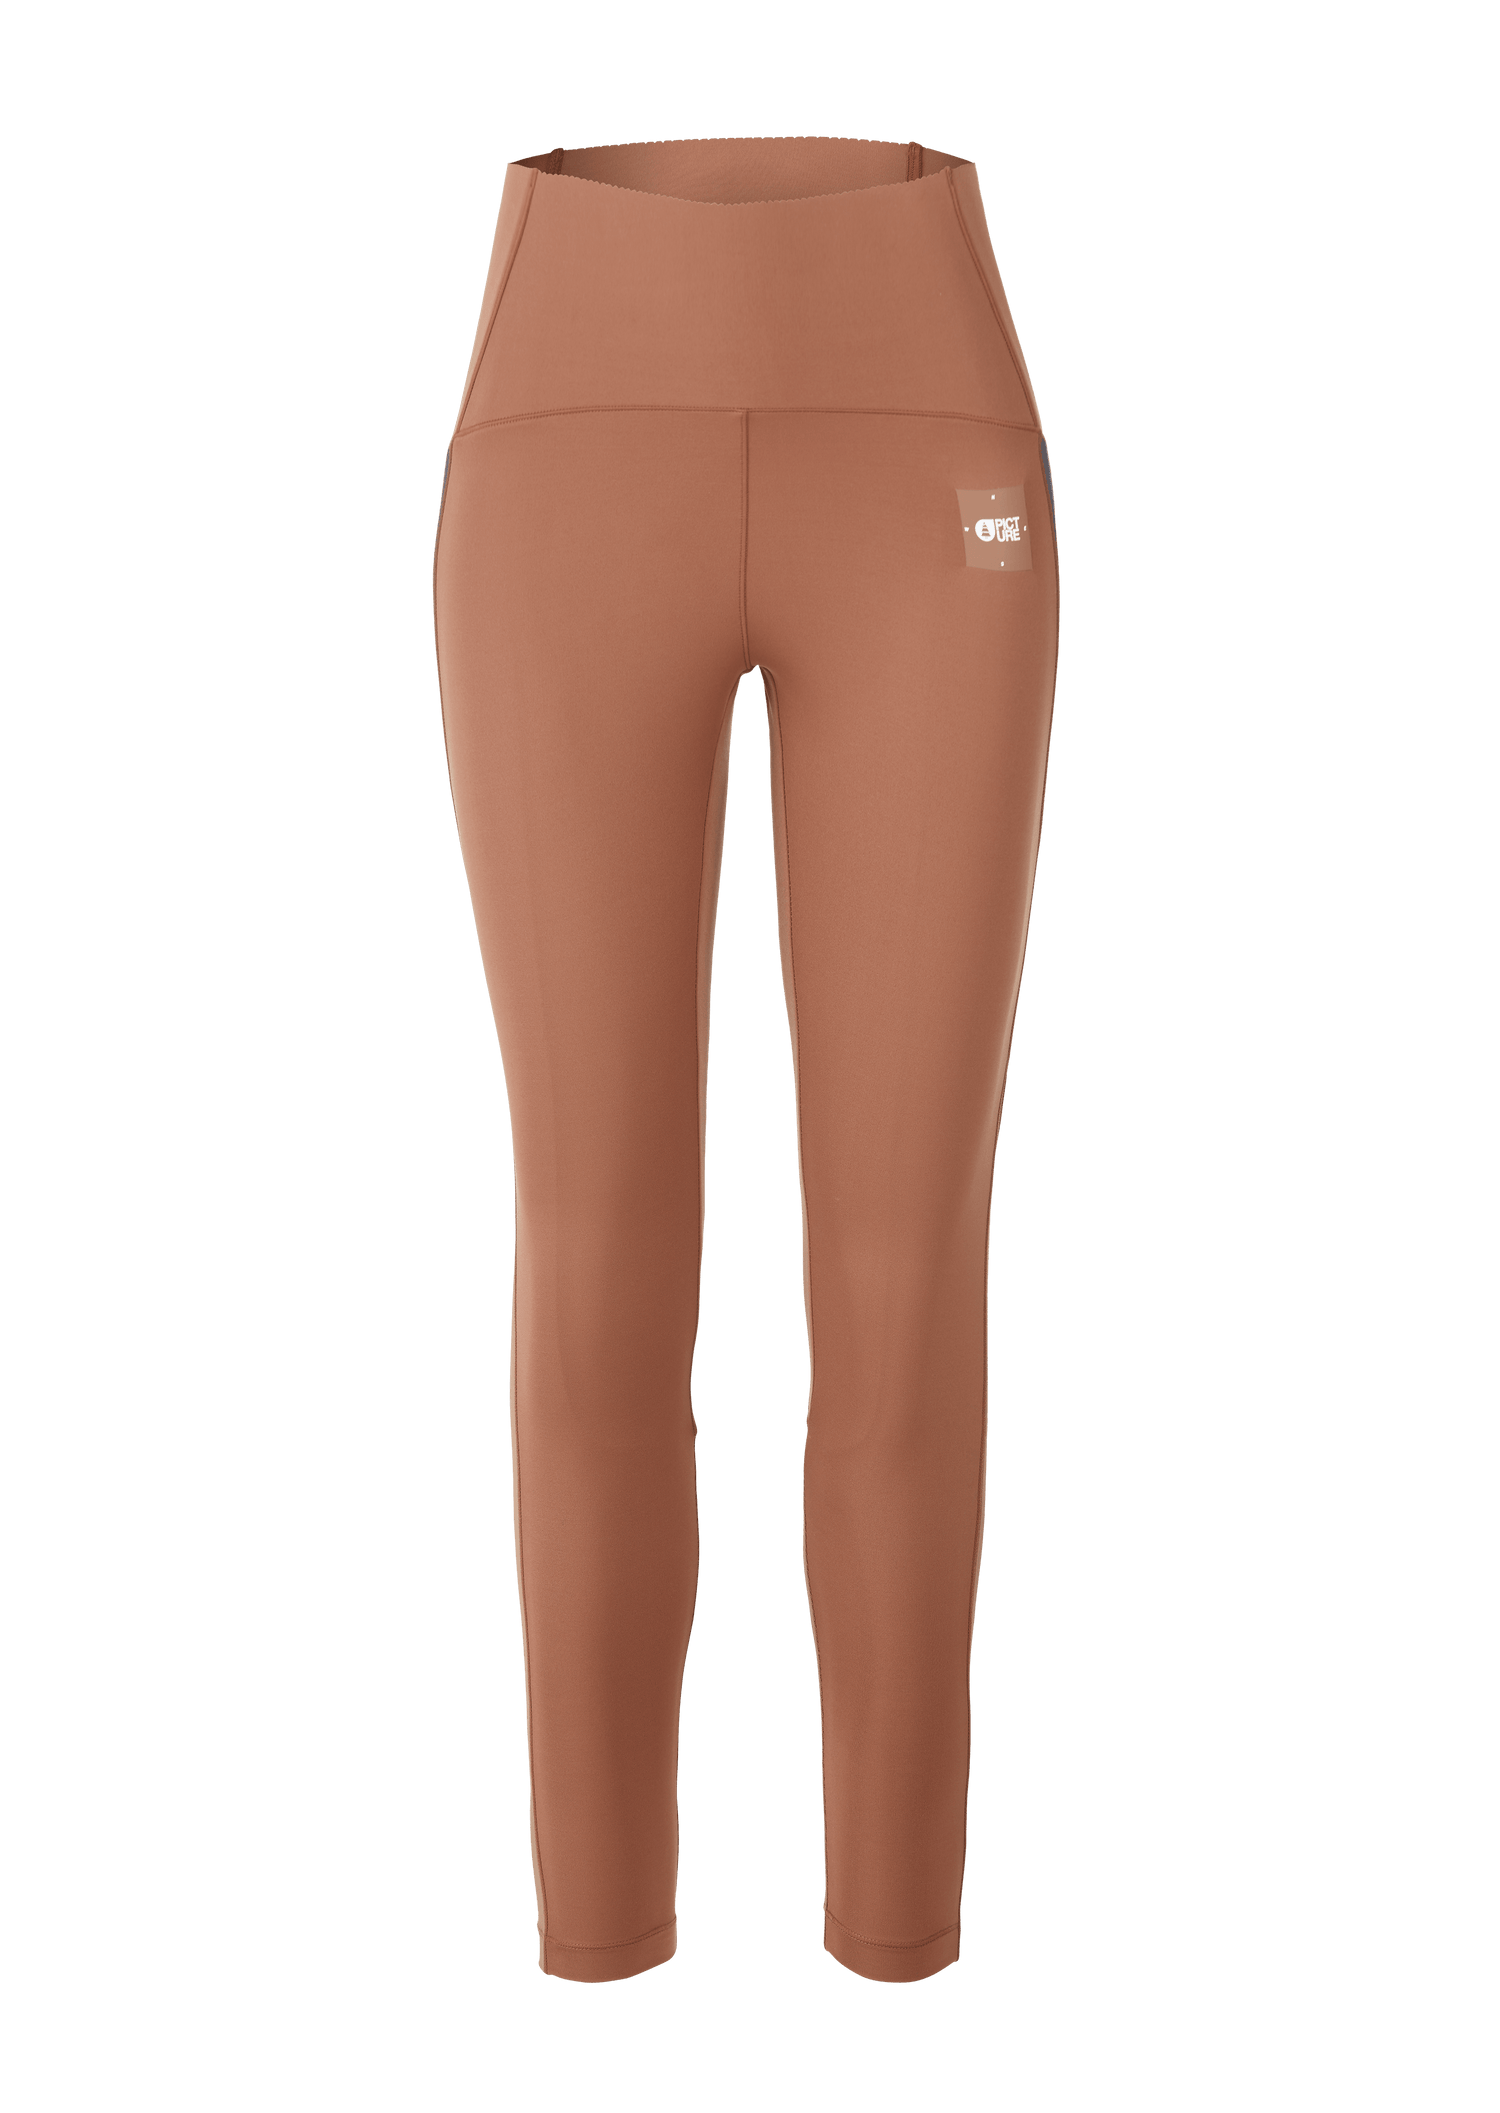 Picture Organic W's Cidelle 7/8 Tech Leggings - Recycled Polyester Rustic Brown Pants